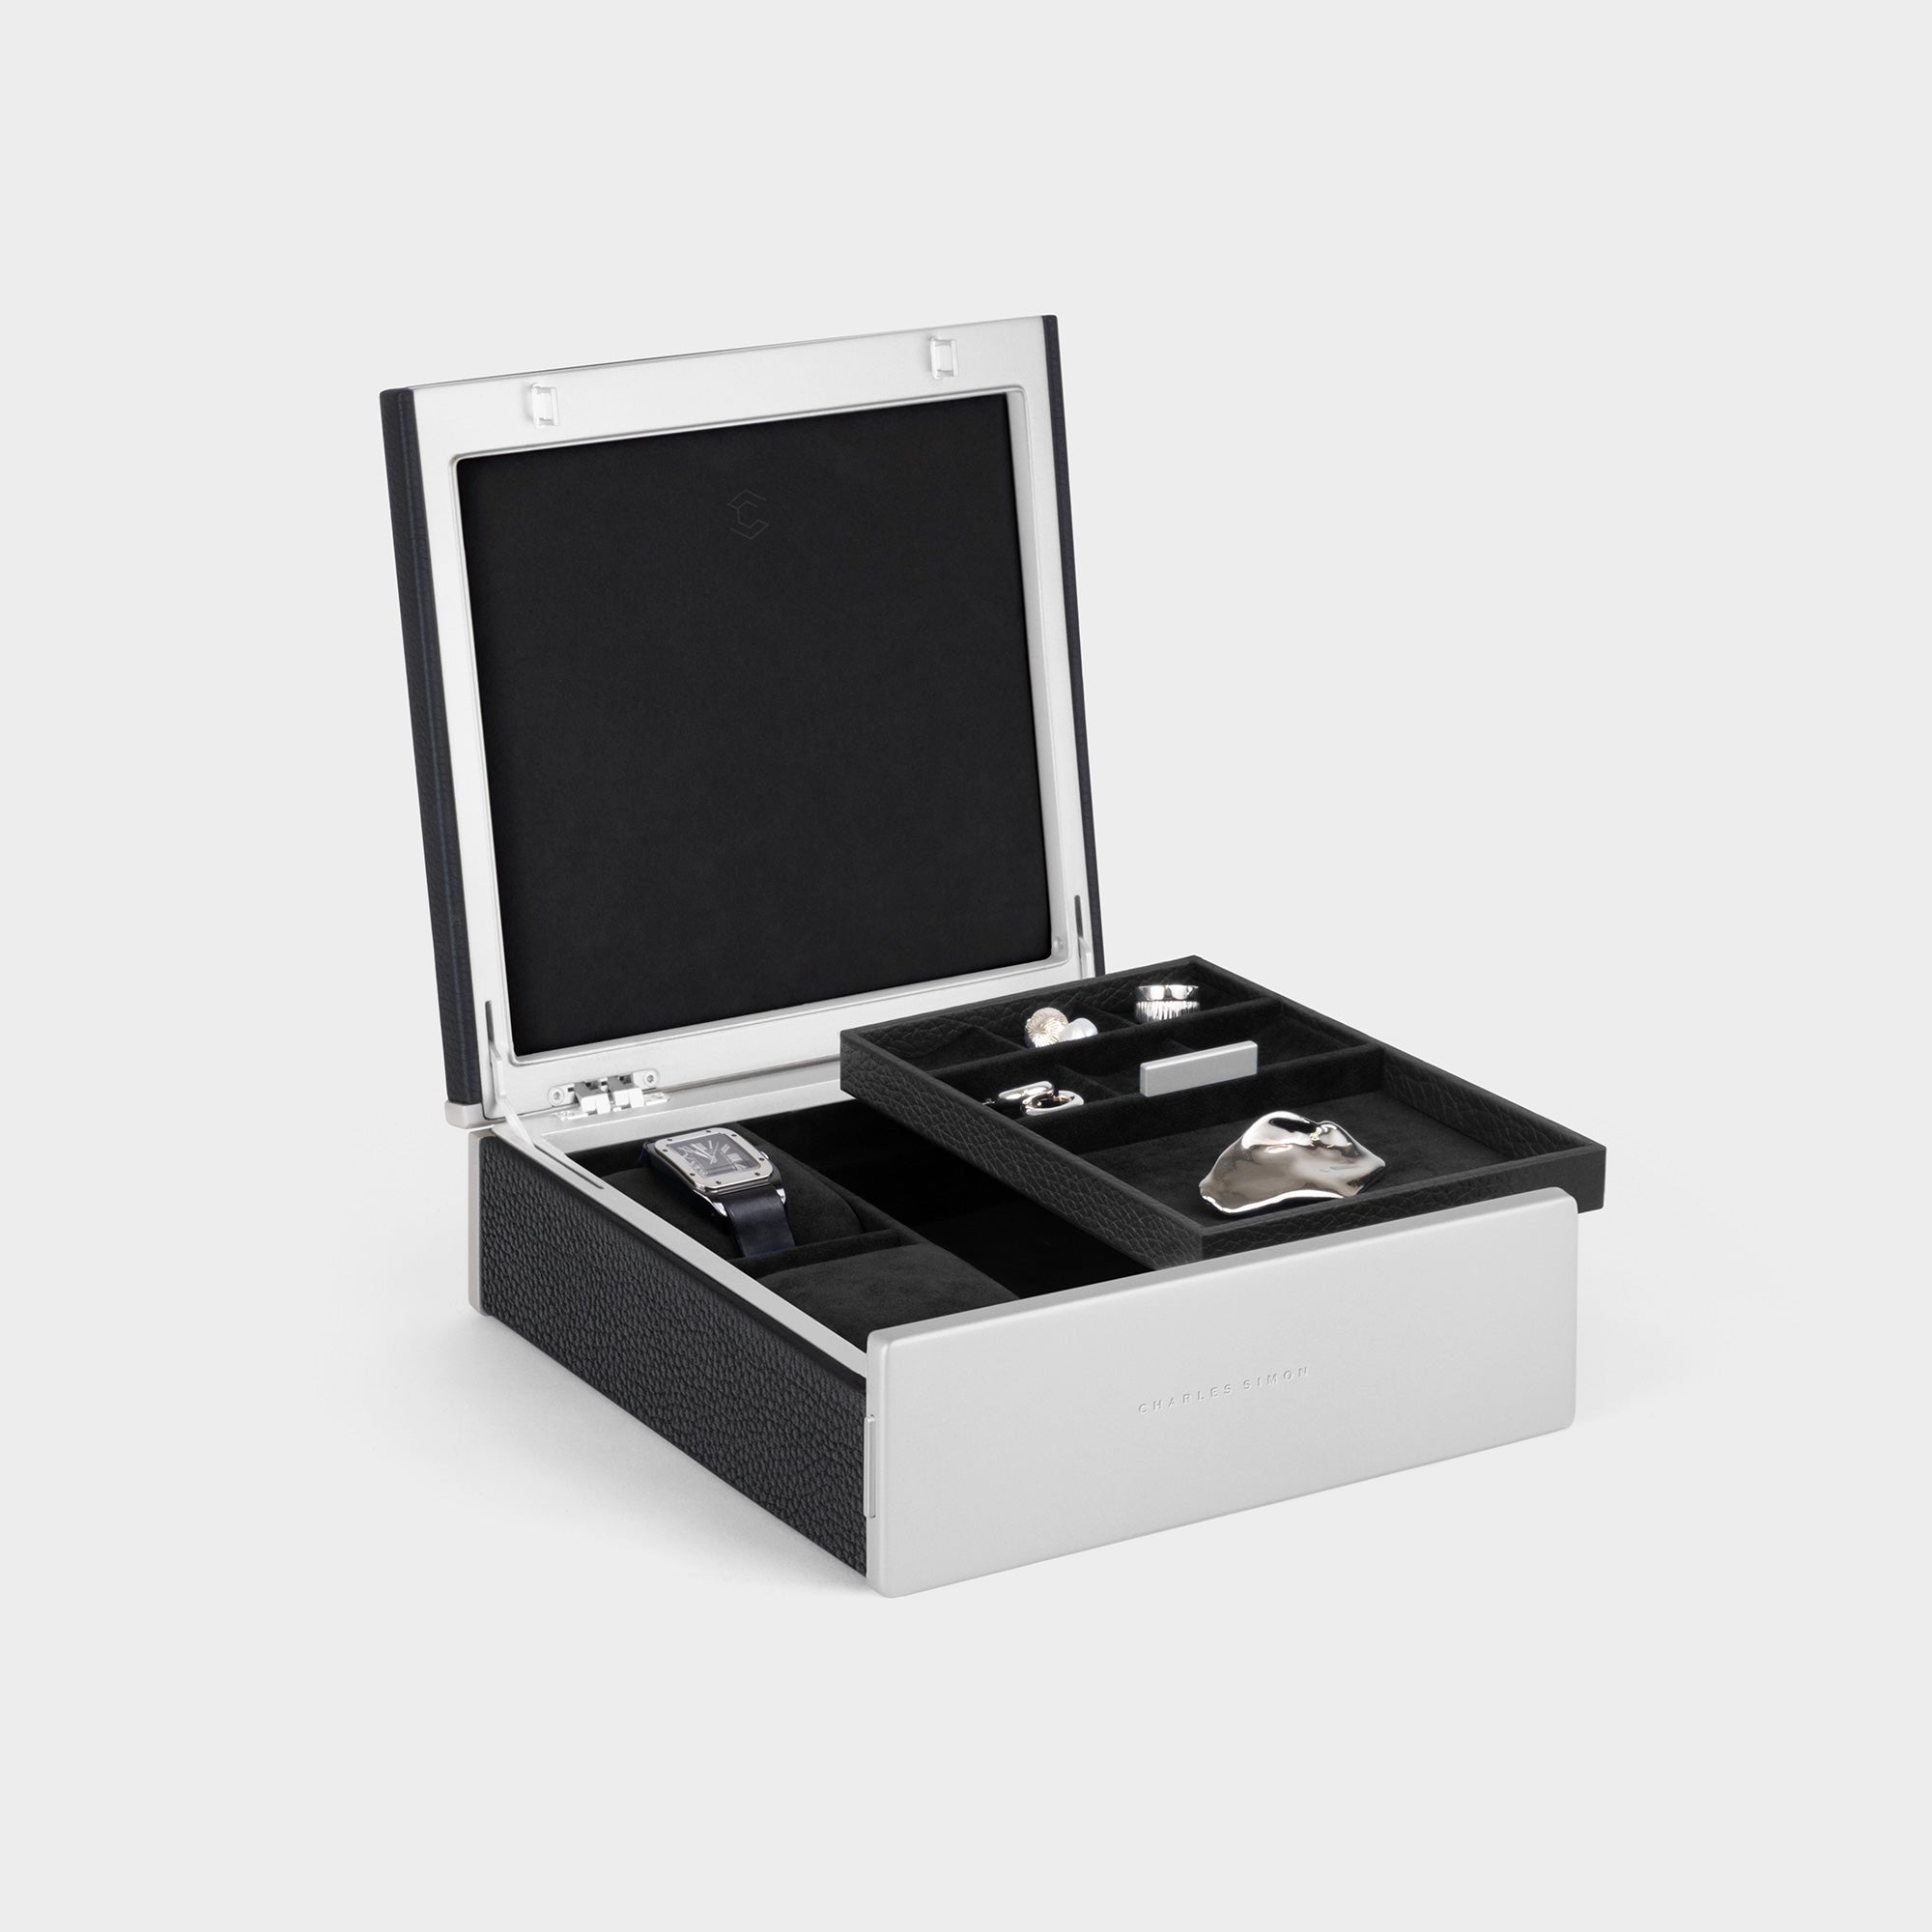 Product photo of Taylor 2 Watch and Jewelry box in black leather and notte interior displaying 2 watches and an entire jewelry collection